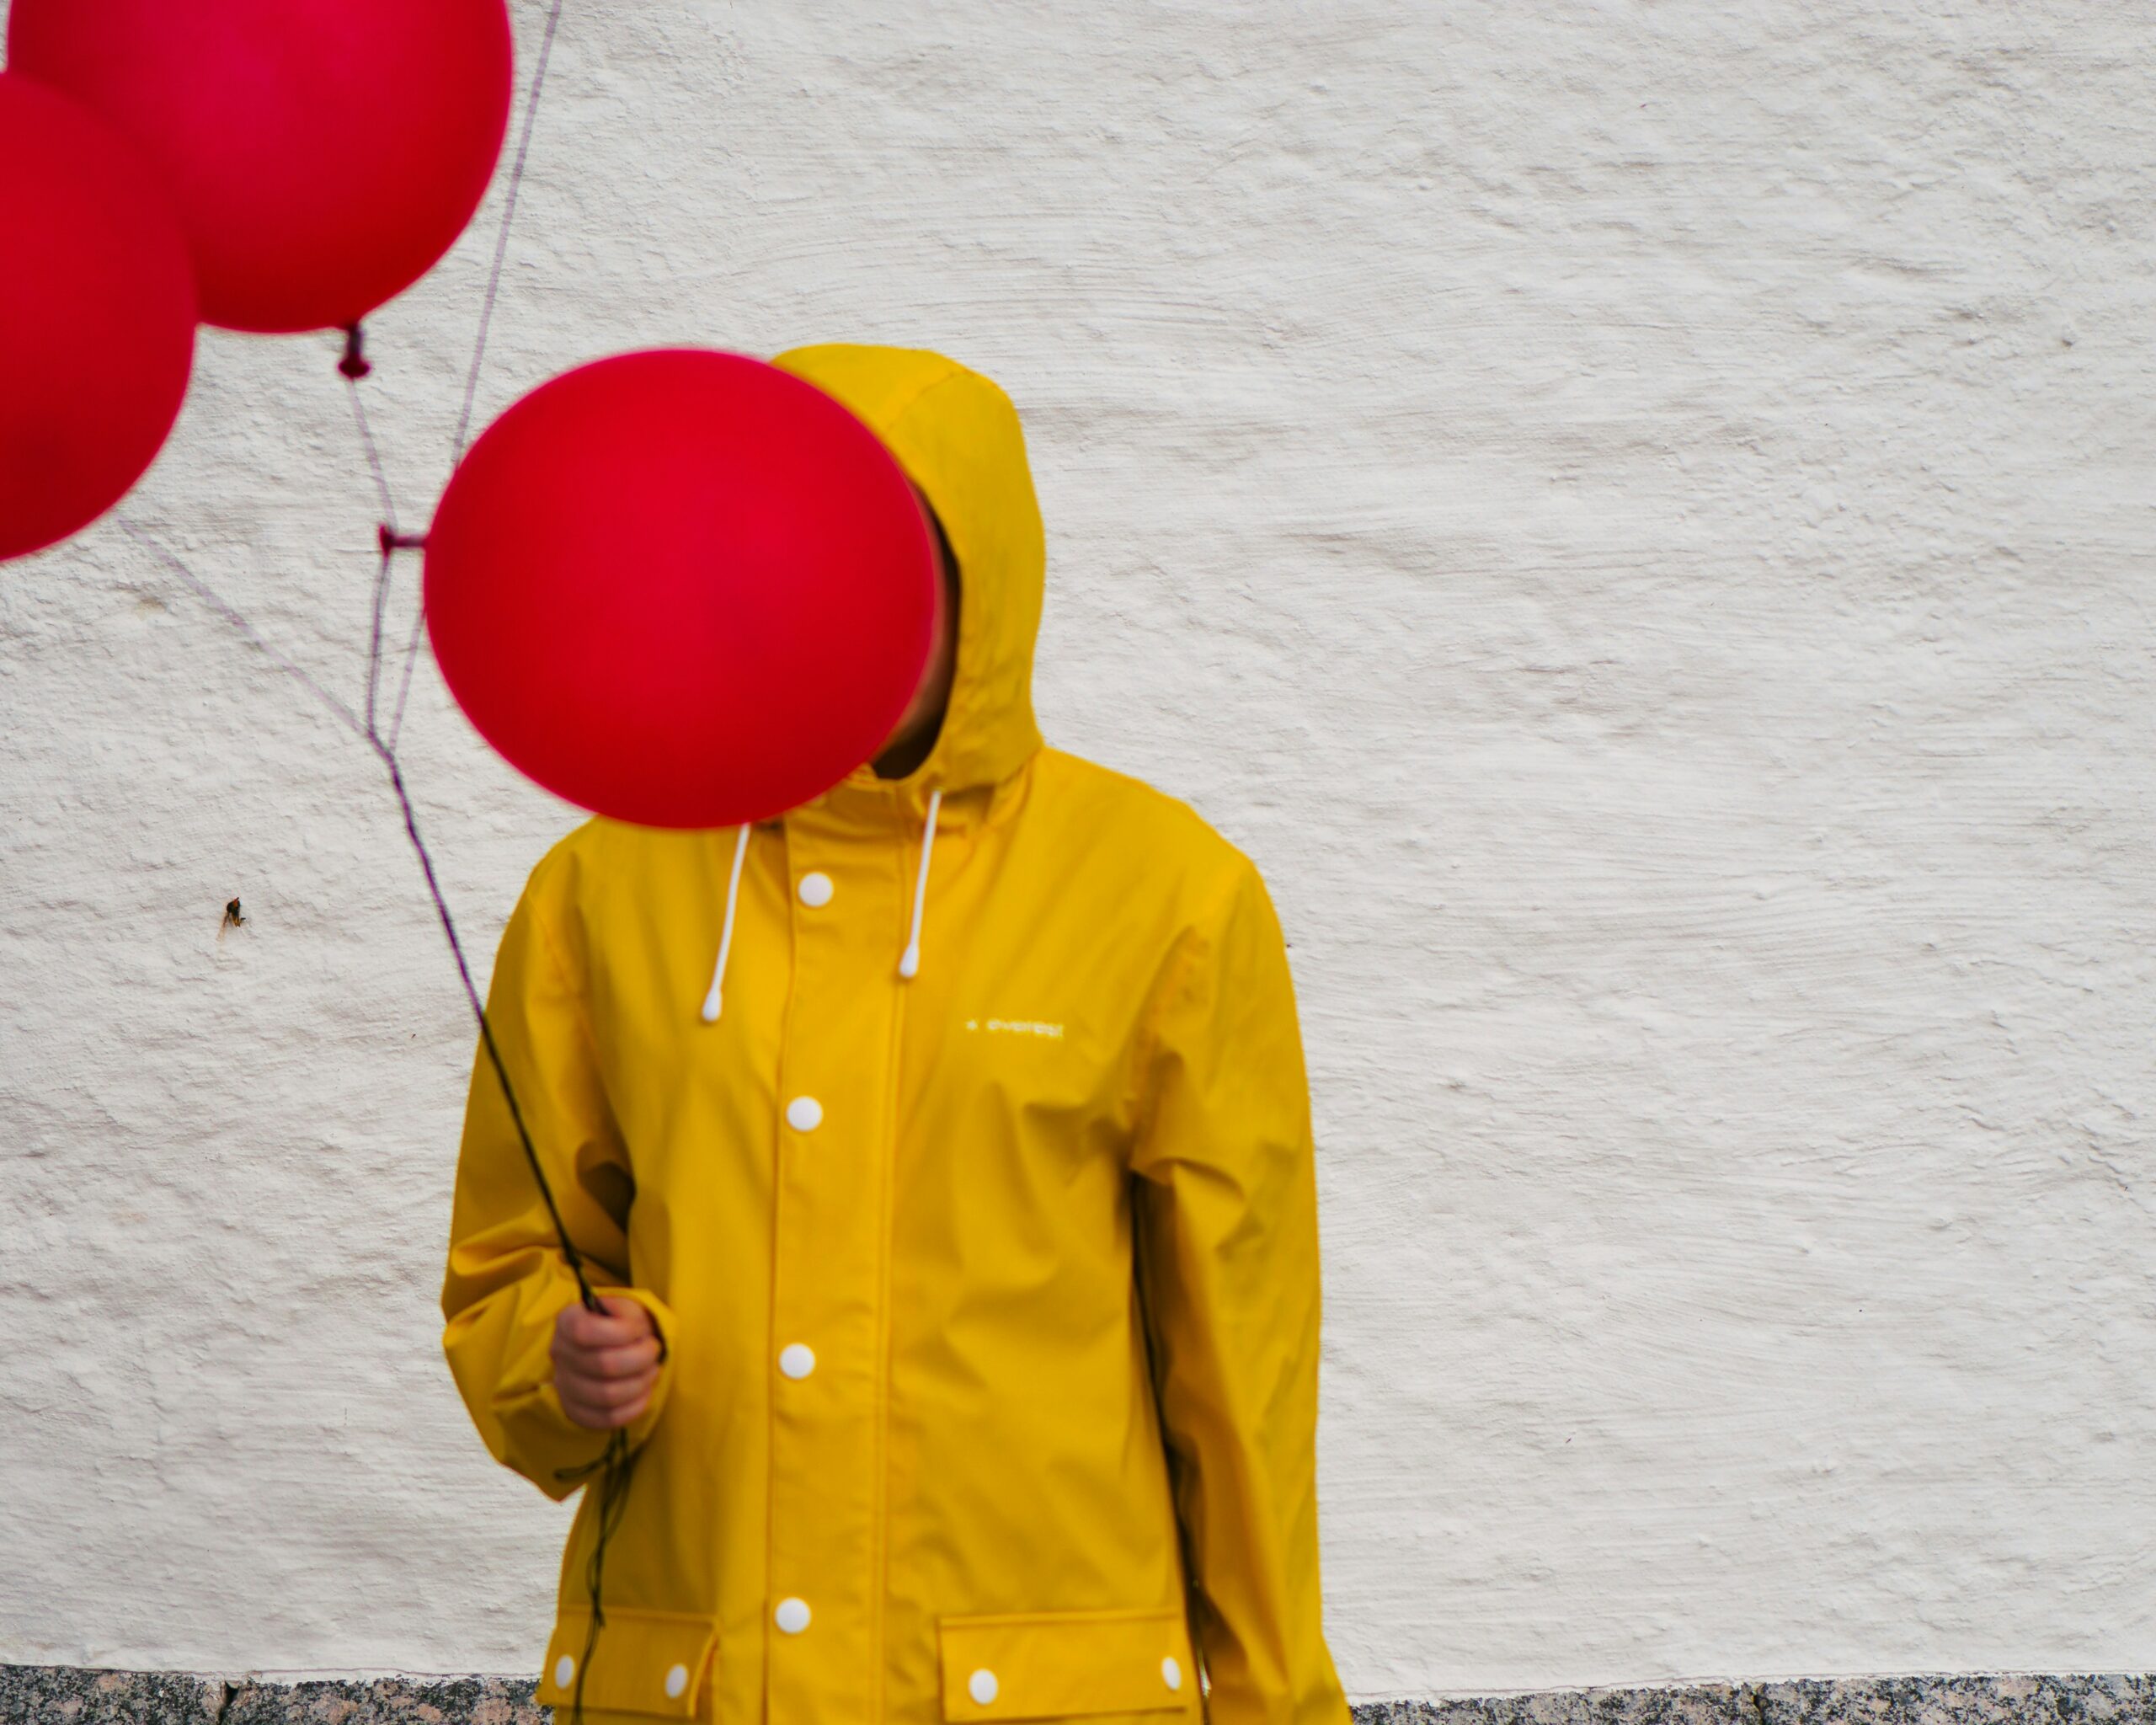 A person in a yellow raincoat holding a red balloon over their face.